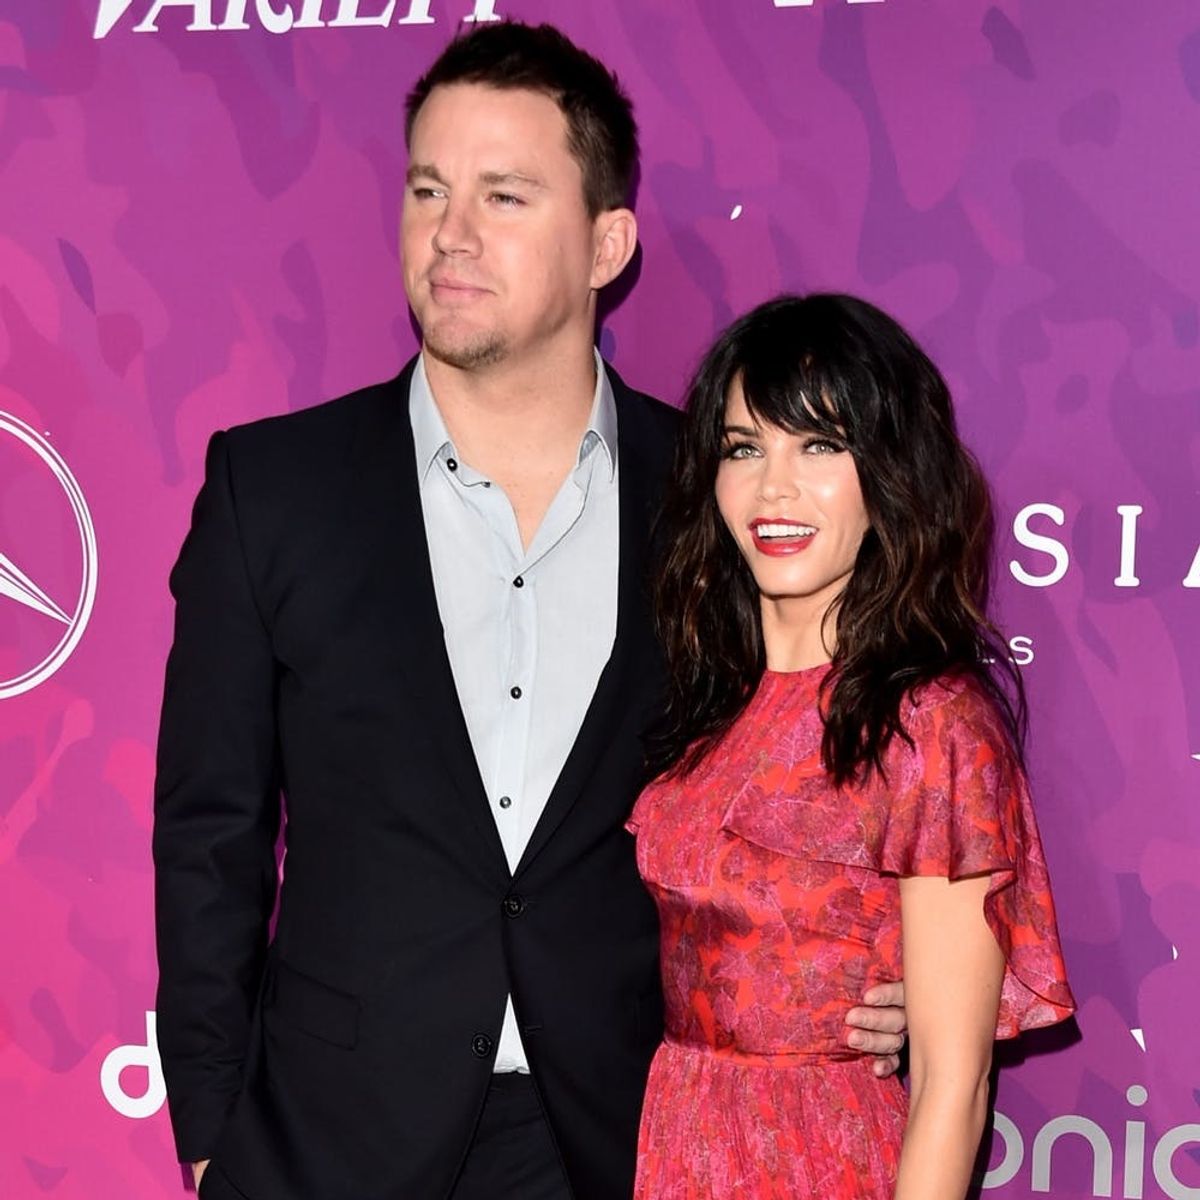 Channing and Jenna Dewan Tatum’s Daughter Has the Most Hilarious Xmas List Ever